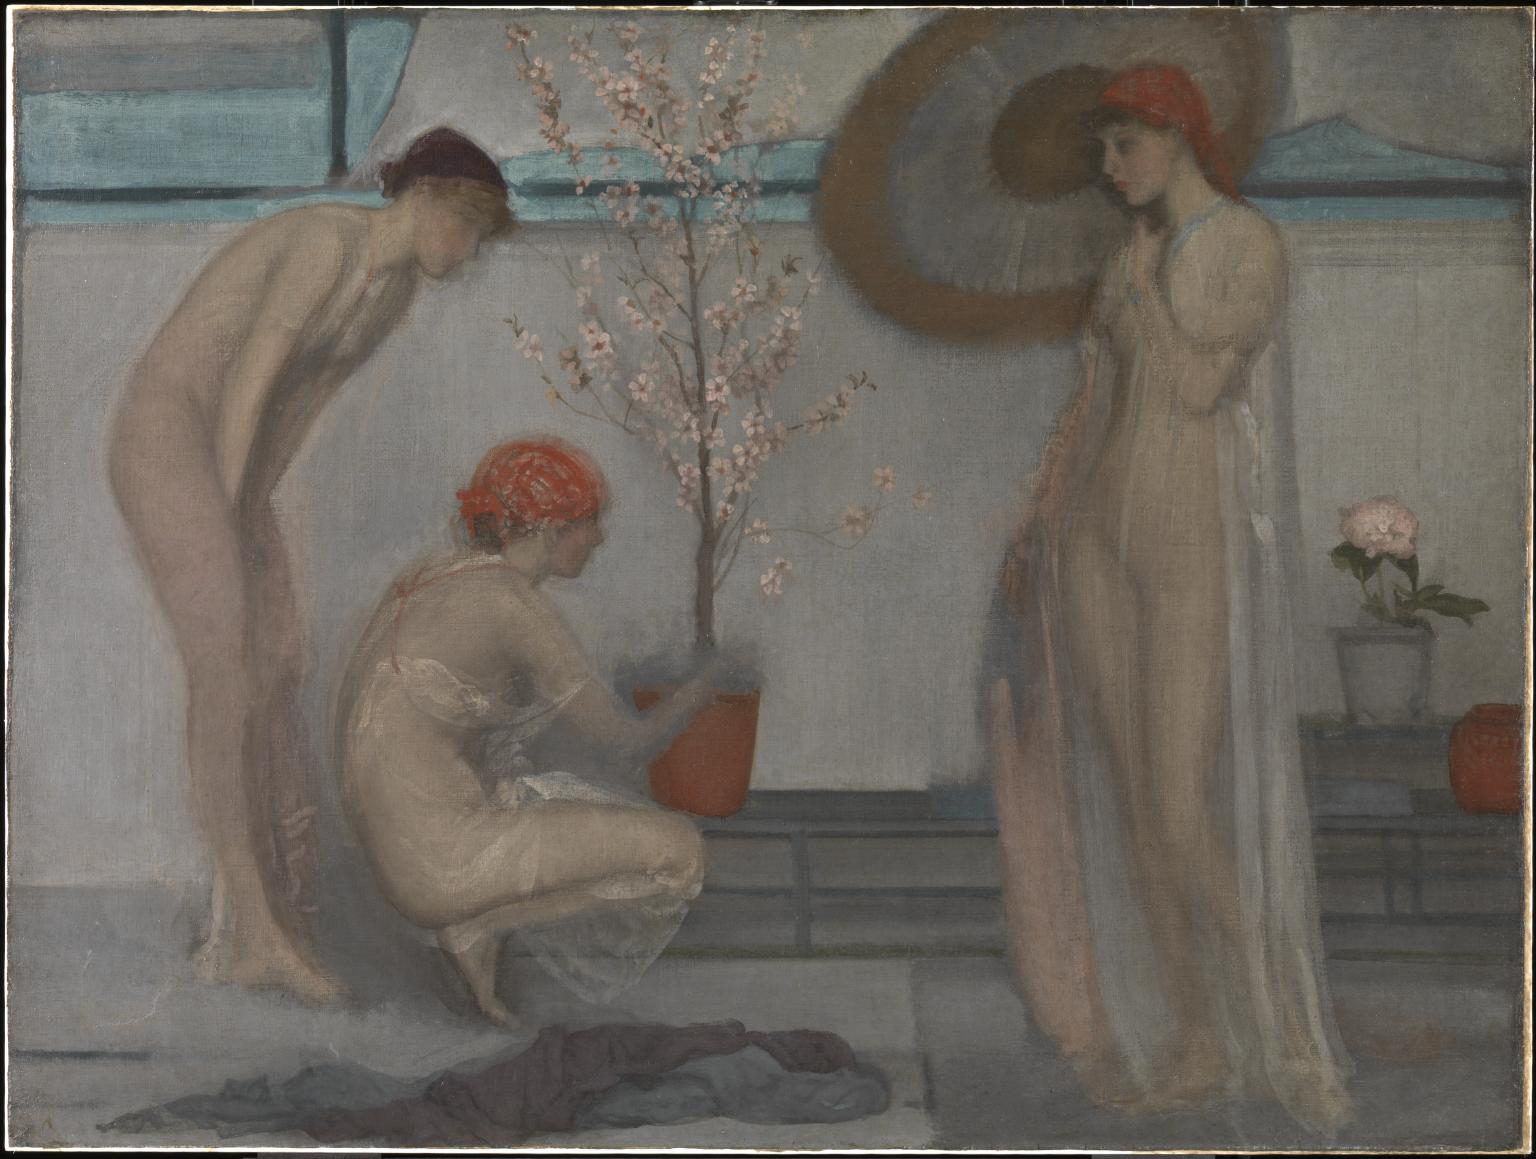 James Abbott McNeill Whistler (American, 1834-1903) 'Three Figures Pink and Grey' 1868-1878